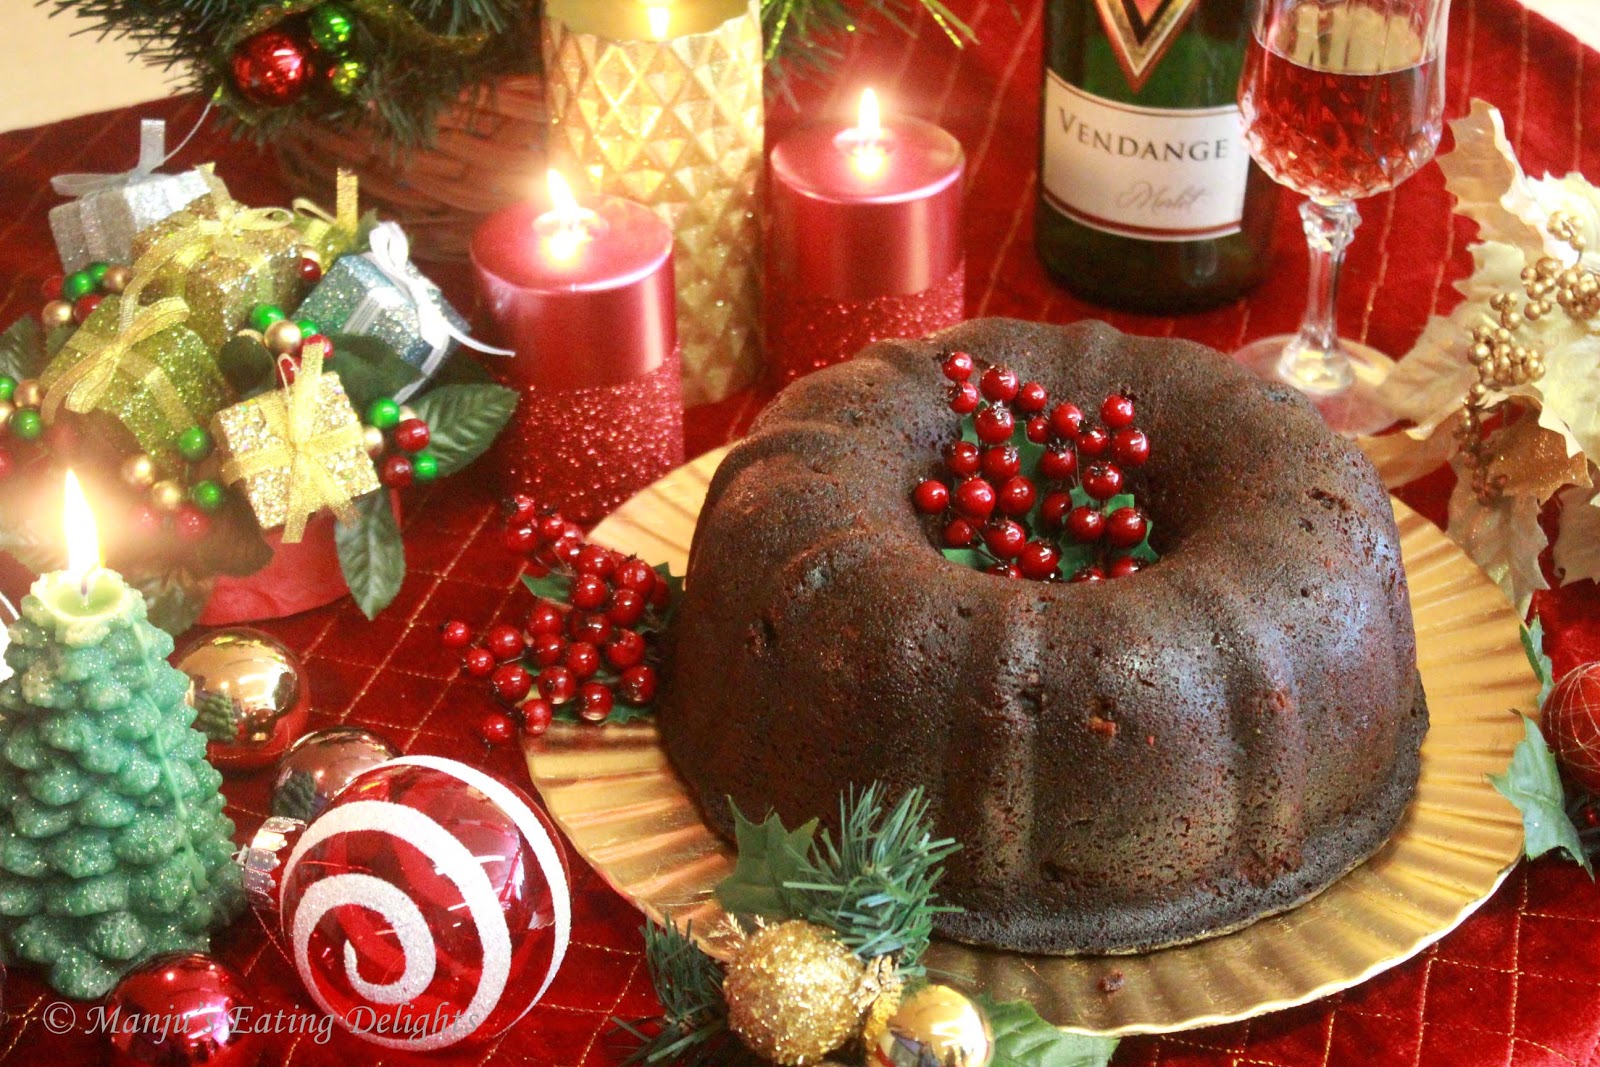 Traditional Christmas Fruit Cake....with Rum soaked fruits!